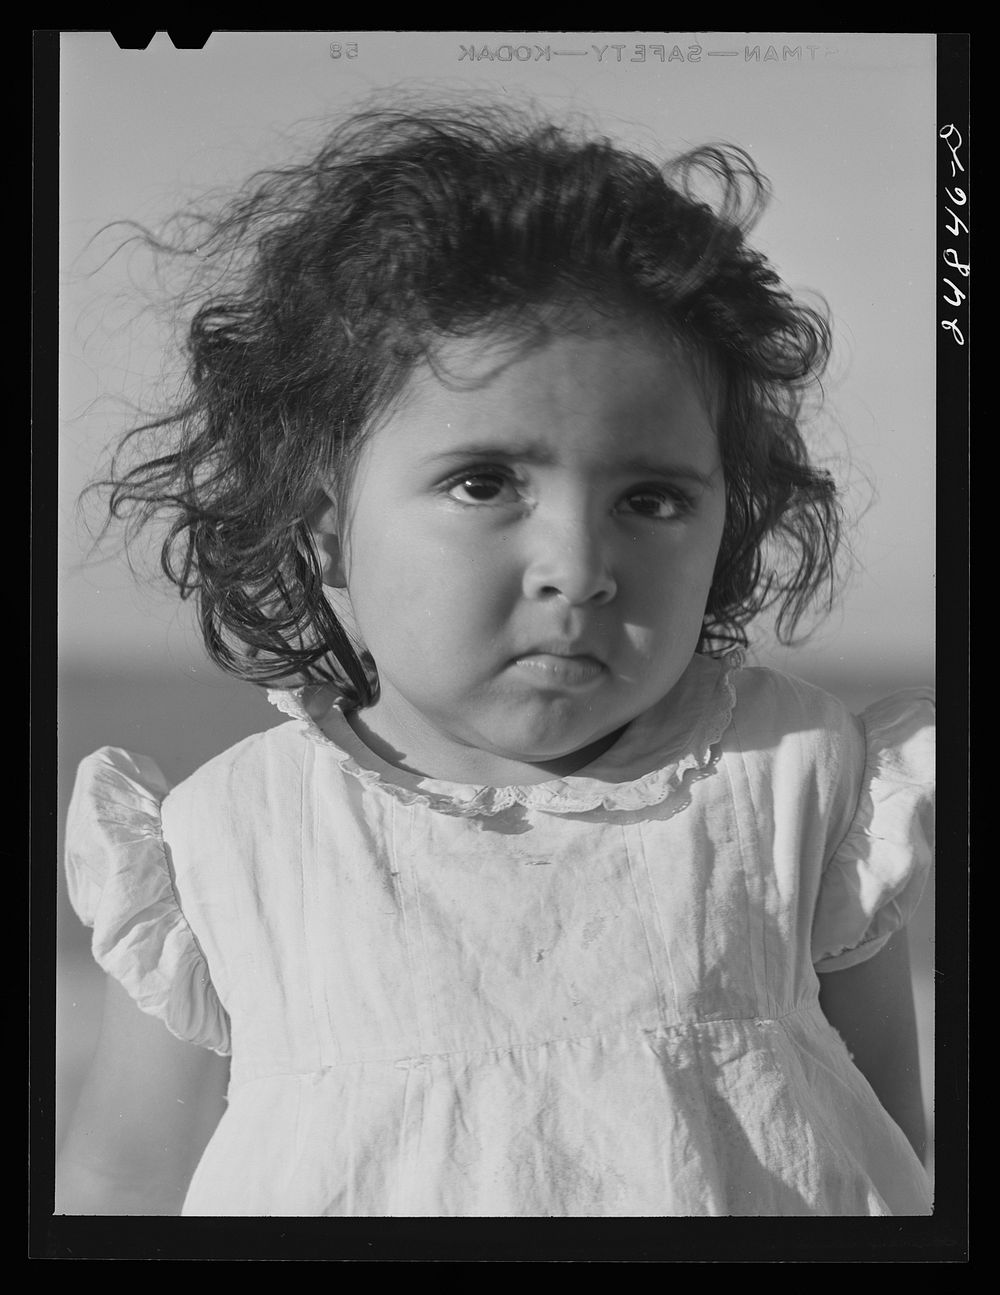 [Untitled photo, possibly related to: Migratory worker's child. Robstown camp, Texas]. Sourced from the Library of Congress.